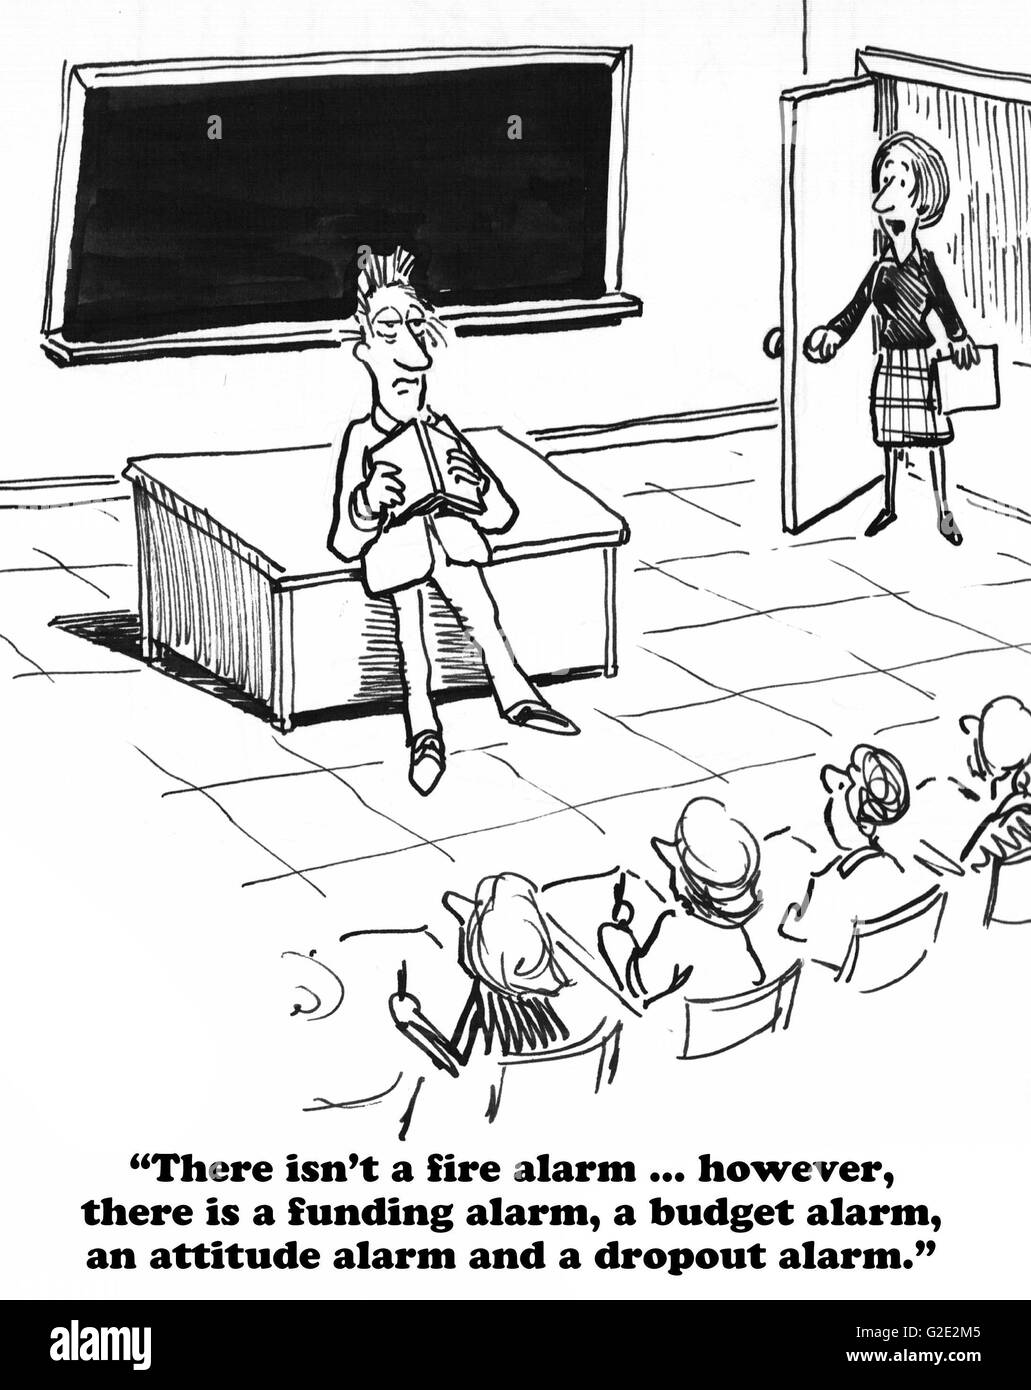 Education cartoon about alarm over a funding gap and high dropout rate. Stock Photo